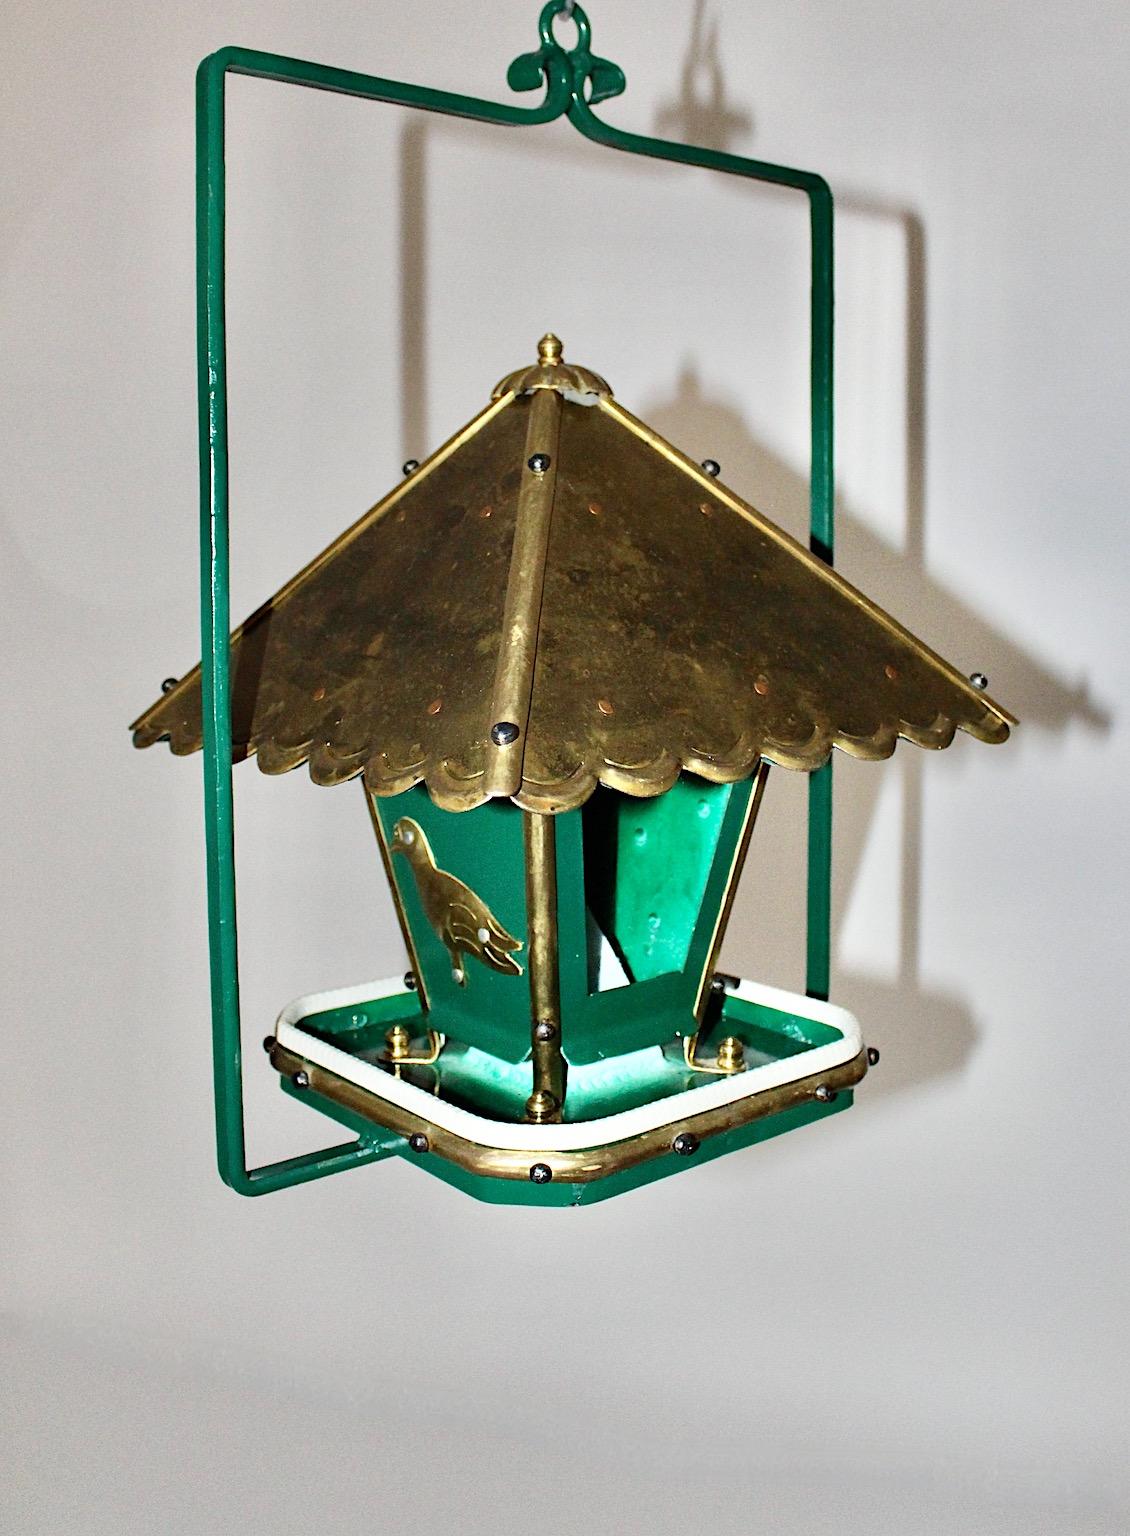 Art Deco style vintage handmade birdhouse from green metal, brass and copper 1980s Austria.
This unique and handmade vintage birdhouse shows a swiveling roof with amazing pagoda details, easy to fill in the seeds. Extra details as bird figures from